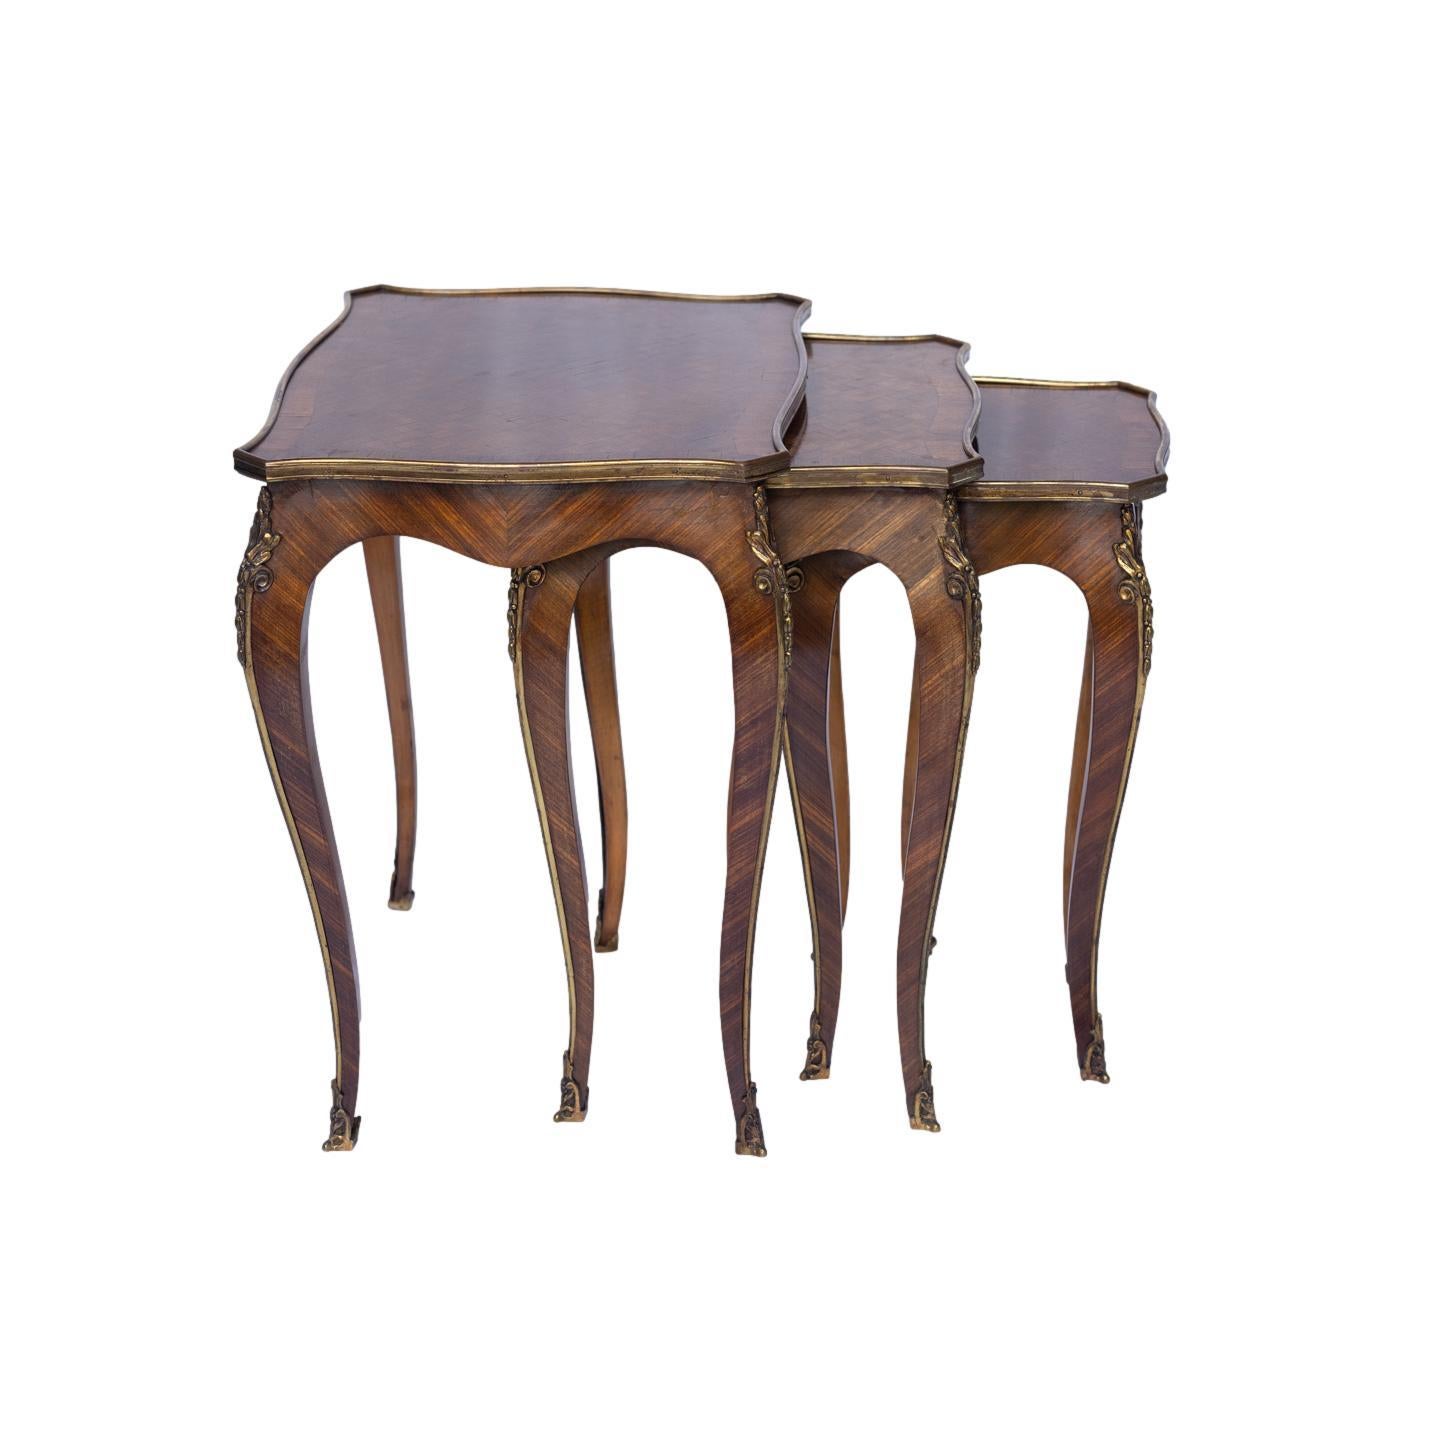 A Suite of Three Louis XV-Style Kingwood and Parquetry Nesting Tables, each with a shaped and banded rectangular top centered by a parquetry panel and within an ormolu band, raised on cabriole legs headed by foliate mounts and ending in sabots,